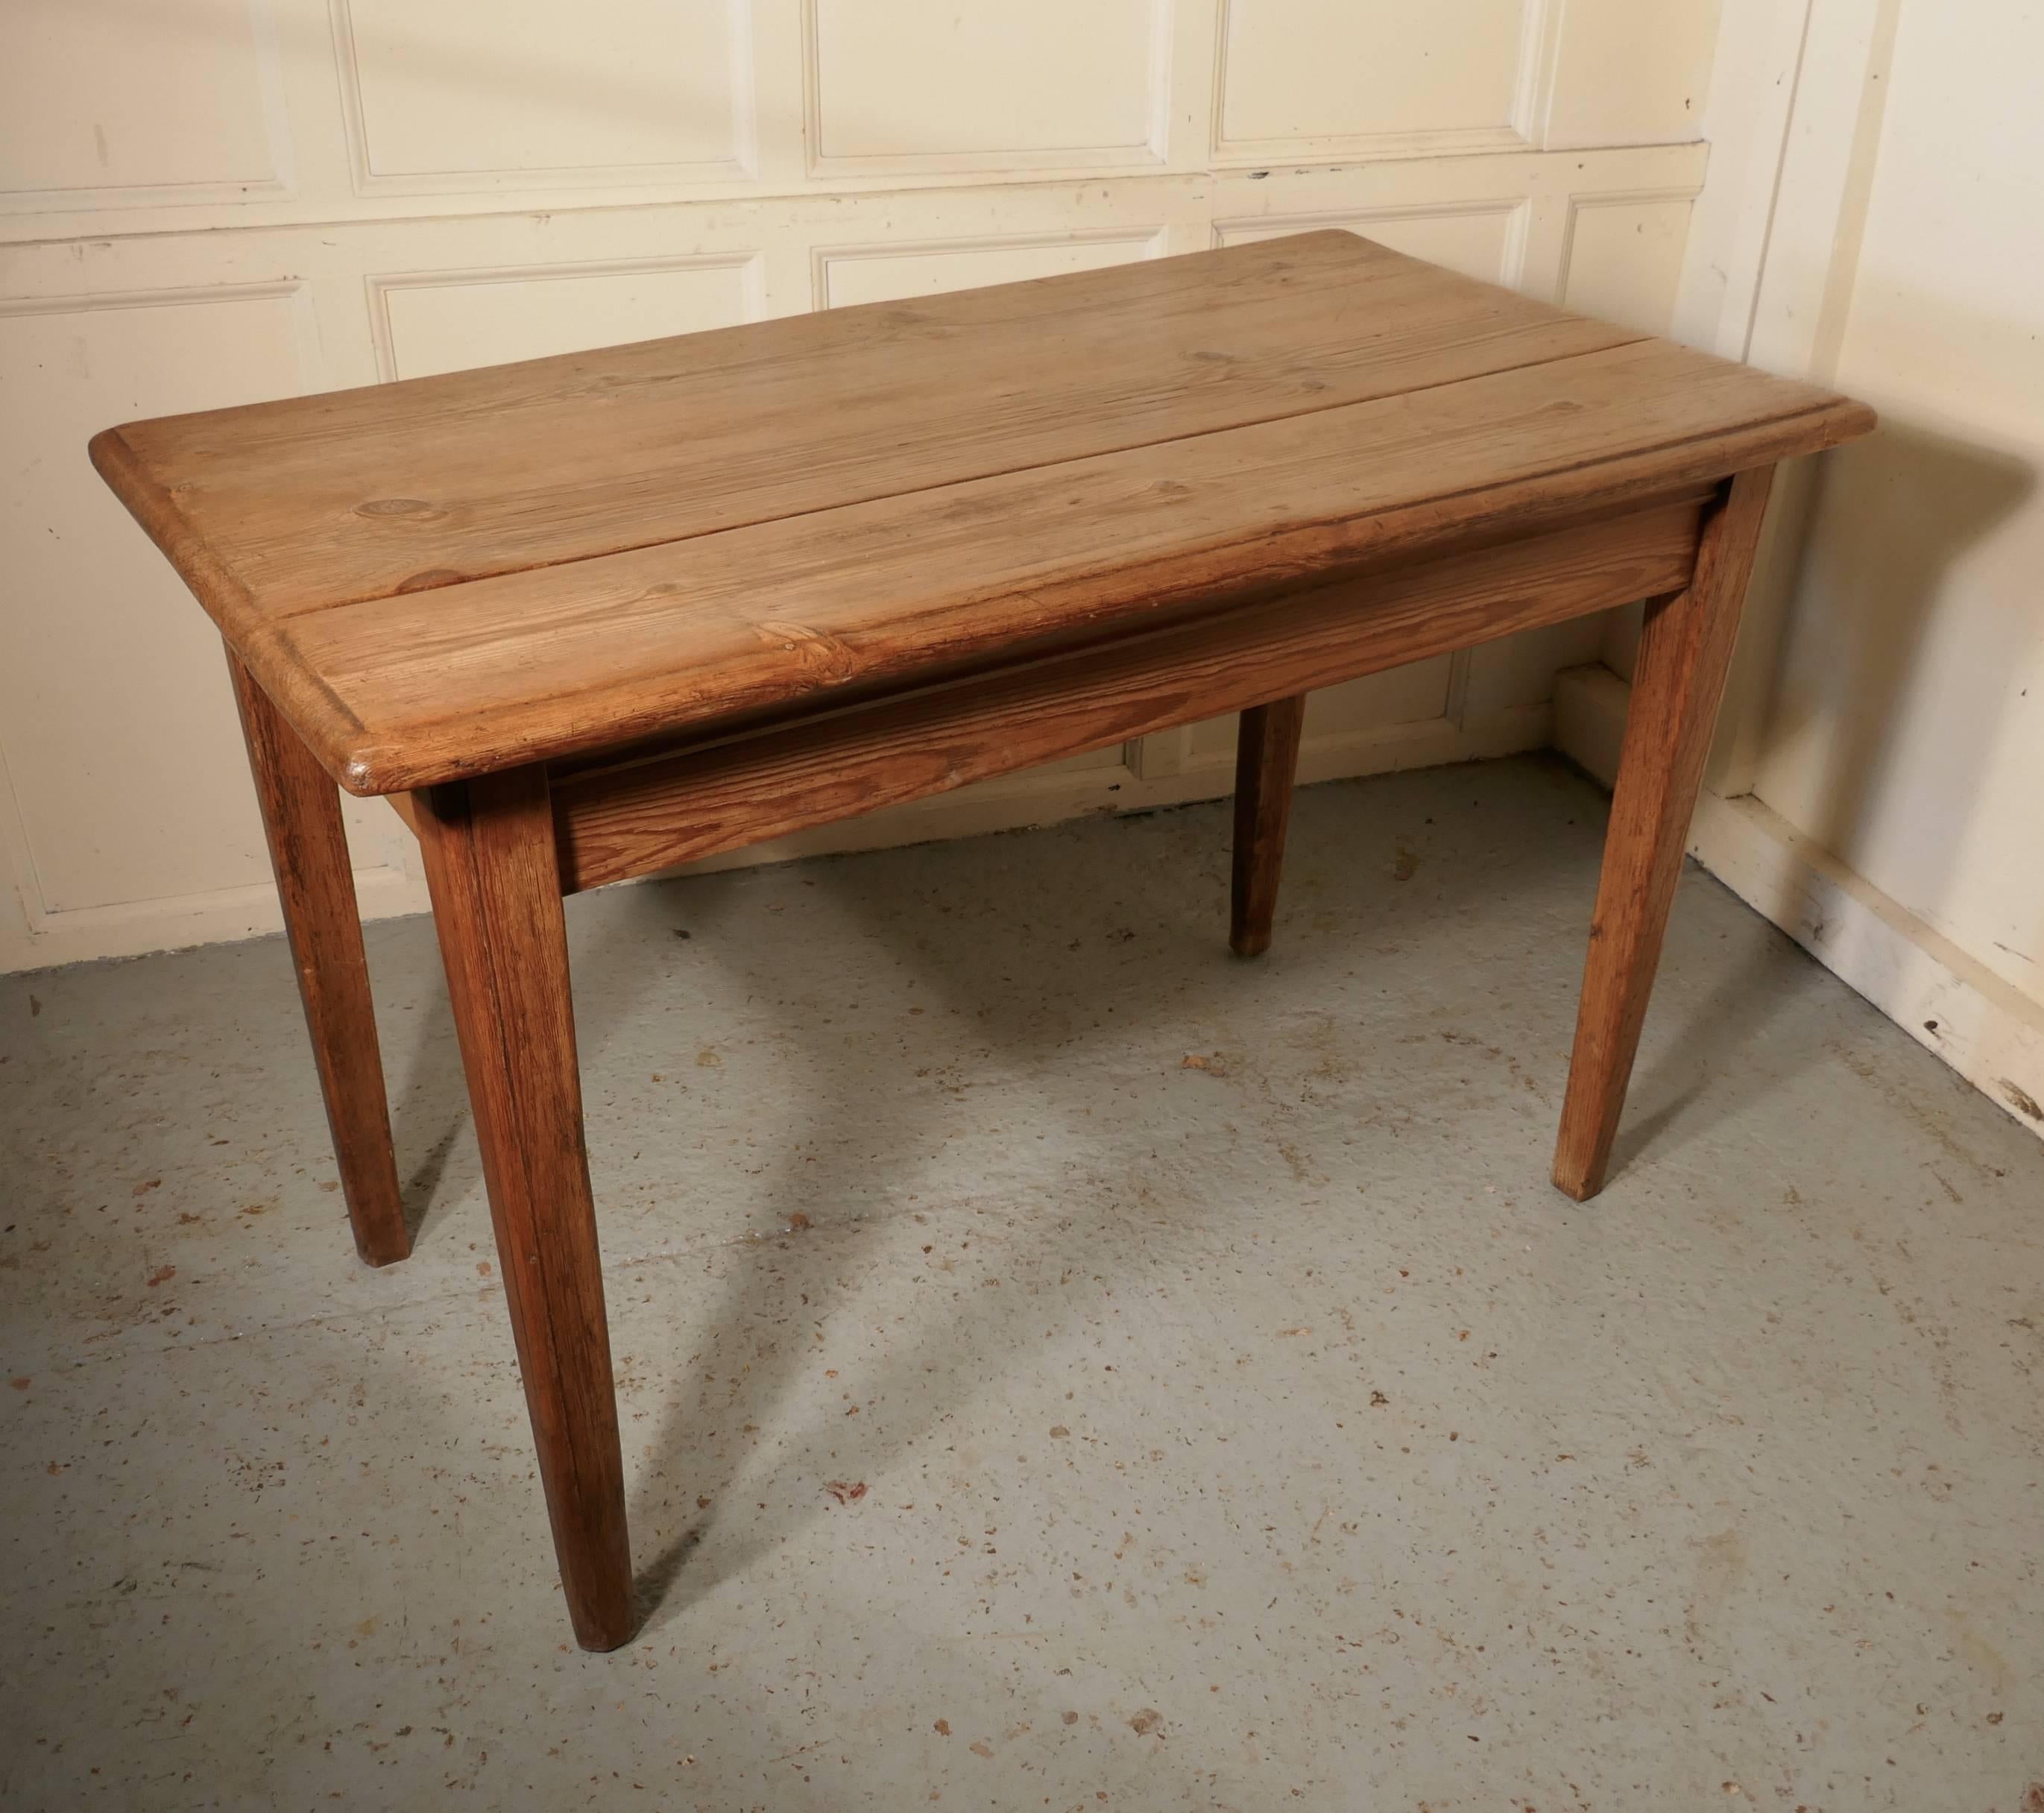 Victorian planked top farmhouse kitchen pine table

This is the one we are all fond of, an old Victorian planked top farmhouse kitchen table
The table is made in pine it has sturdy square slightly tapering pine legs and a 1” thick pine plank top